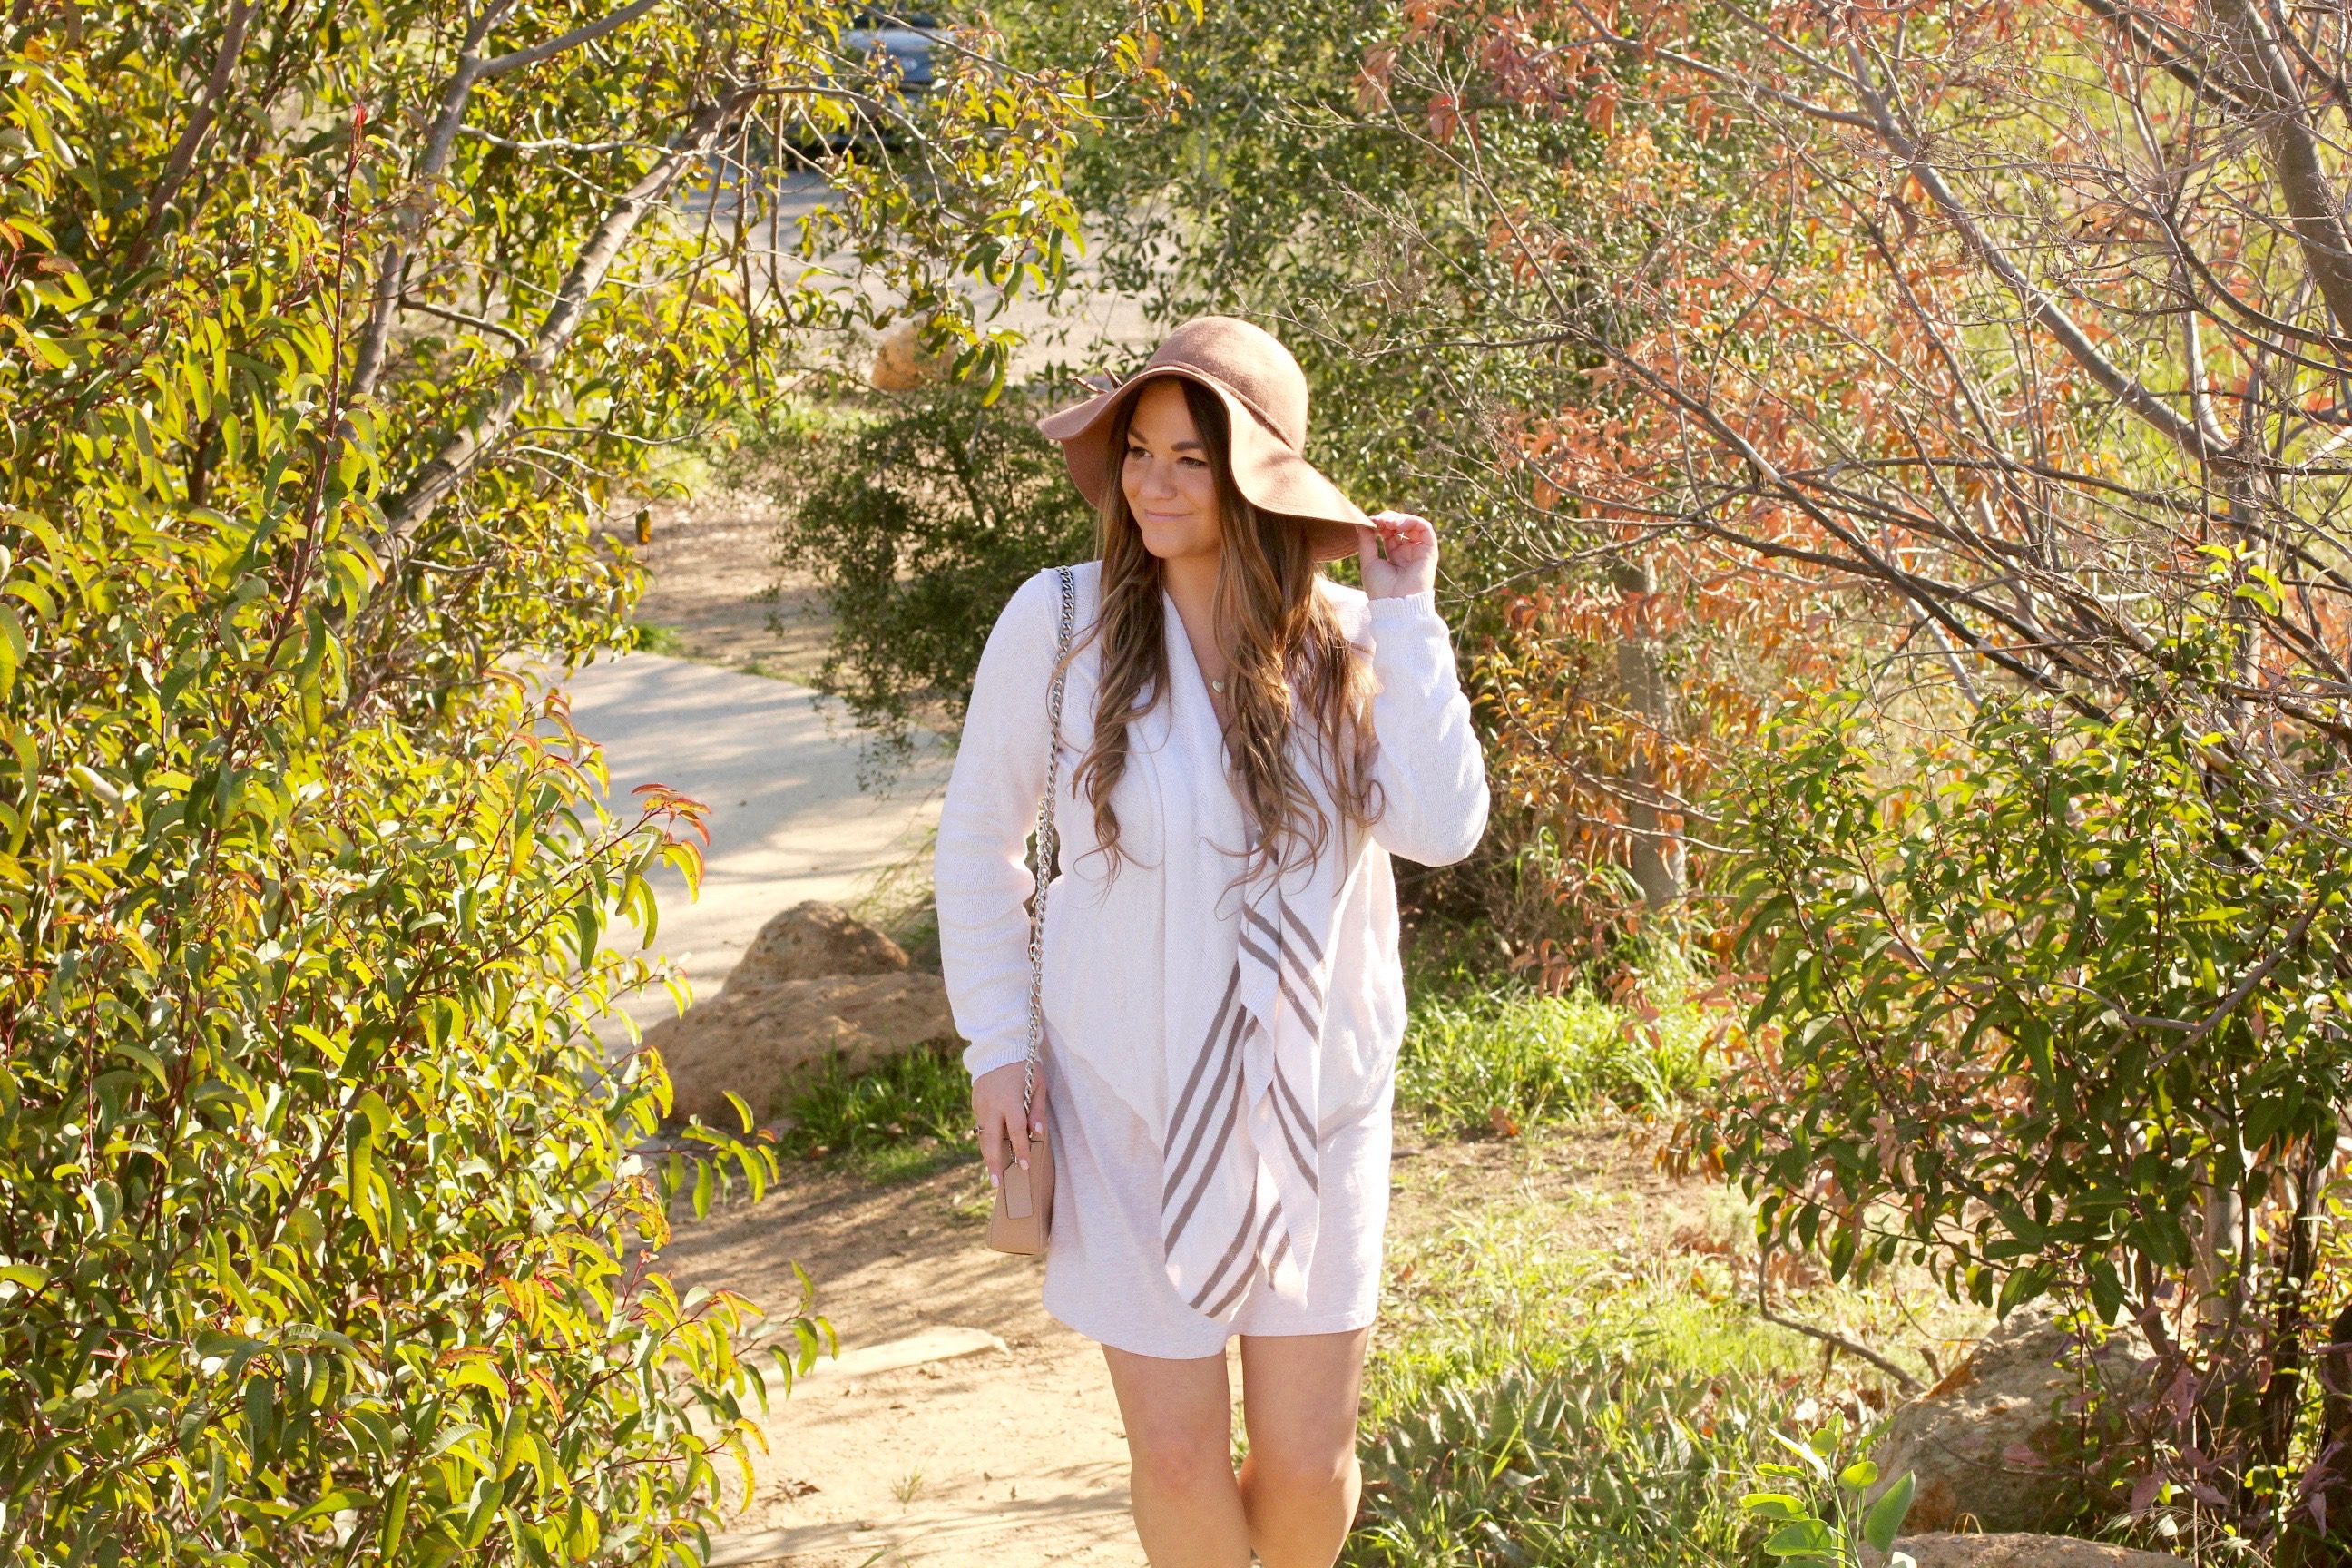 missyonmadison, melissa tierney, spring style, spring fashion, spring trends, fashion blogger, la blogger, hollywood hills, tan floppy hat, target style, target floppy hat, old navy cardigan, beige open front cardigan, beige suede lace up ankle boots, beige suede booties, beige leather crossbody bag, coach crossbody bag, beige chain crossbody bag, threads for thought dress, threads for thought penny dress, beige cardigan,